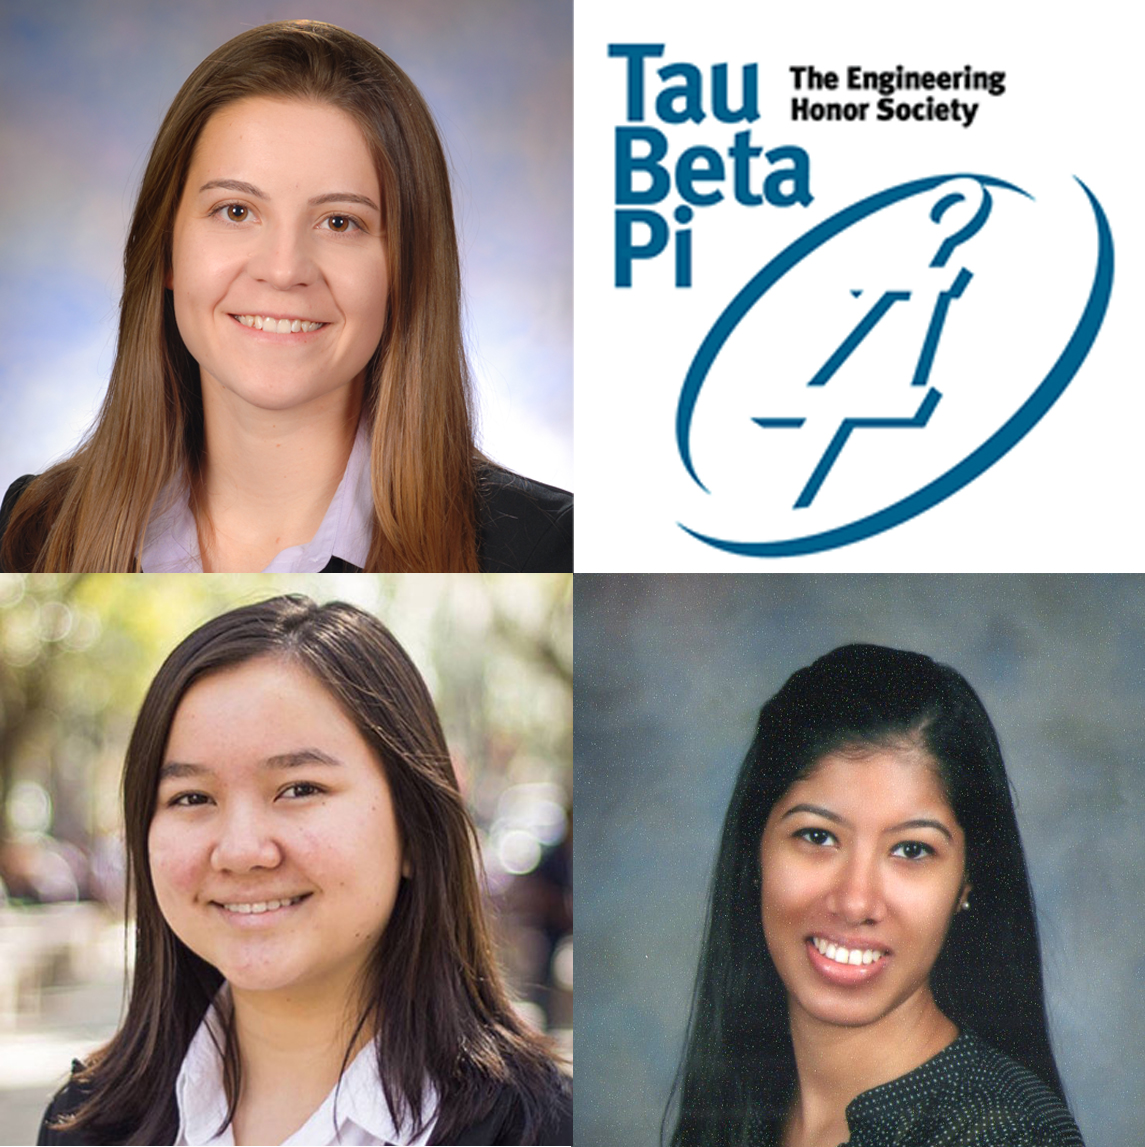 Shannon, Shree, and Olivia elected officers of Tau Beta Pi, Florida Alpha chapter